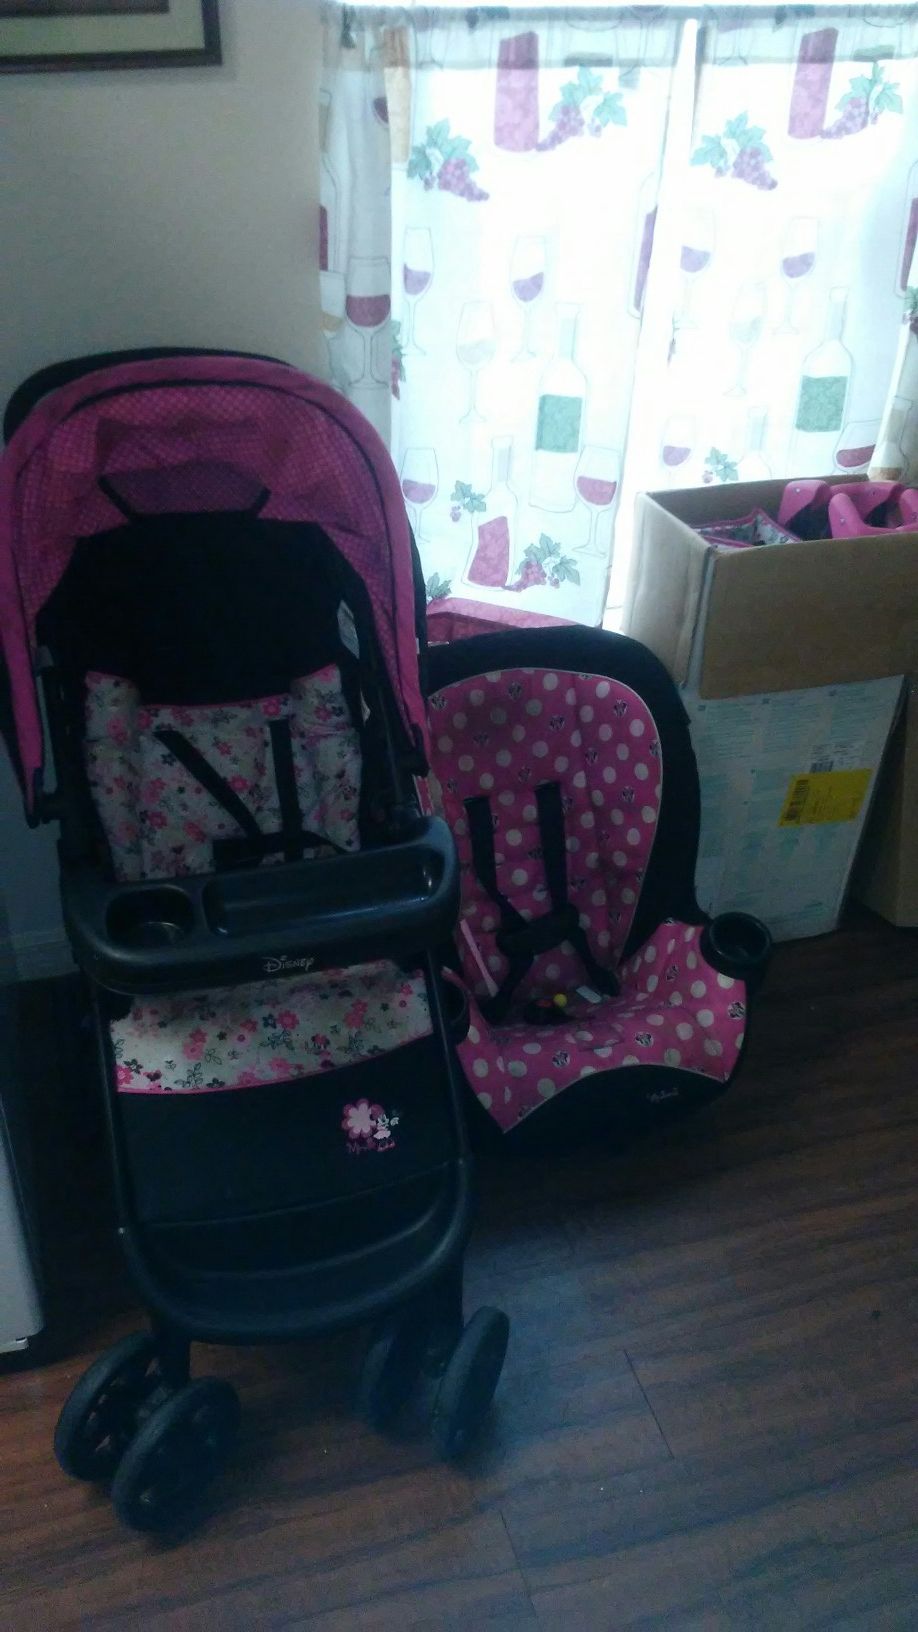 Minnie Mouse stroller car seat and playpen